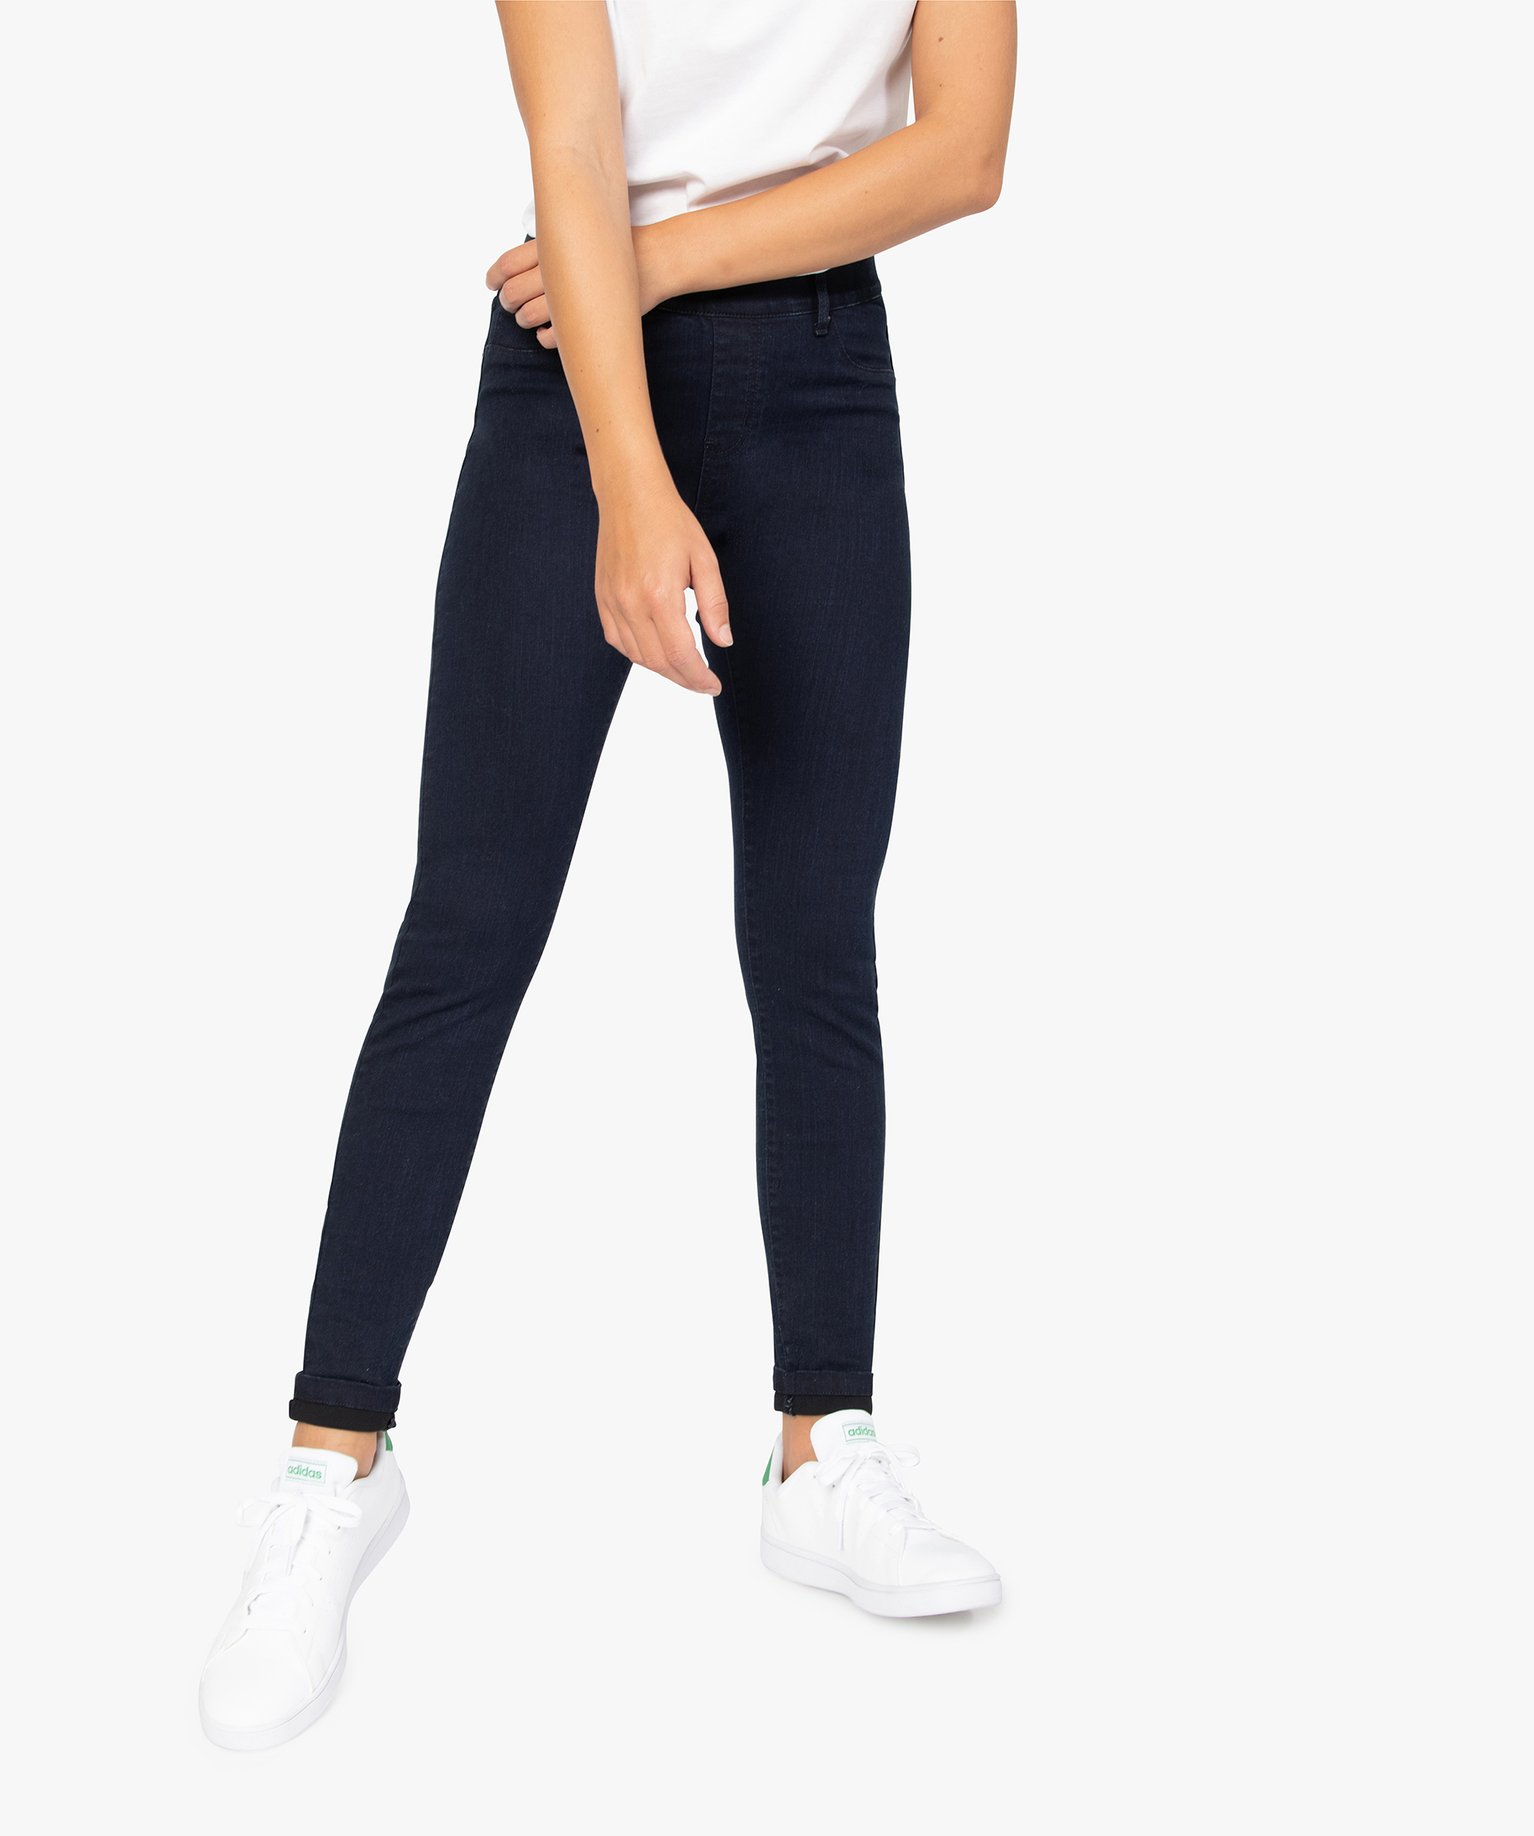 jegging femme taille normale